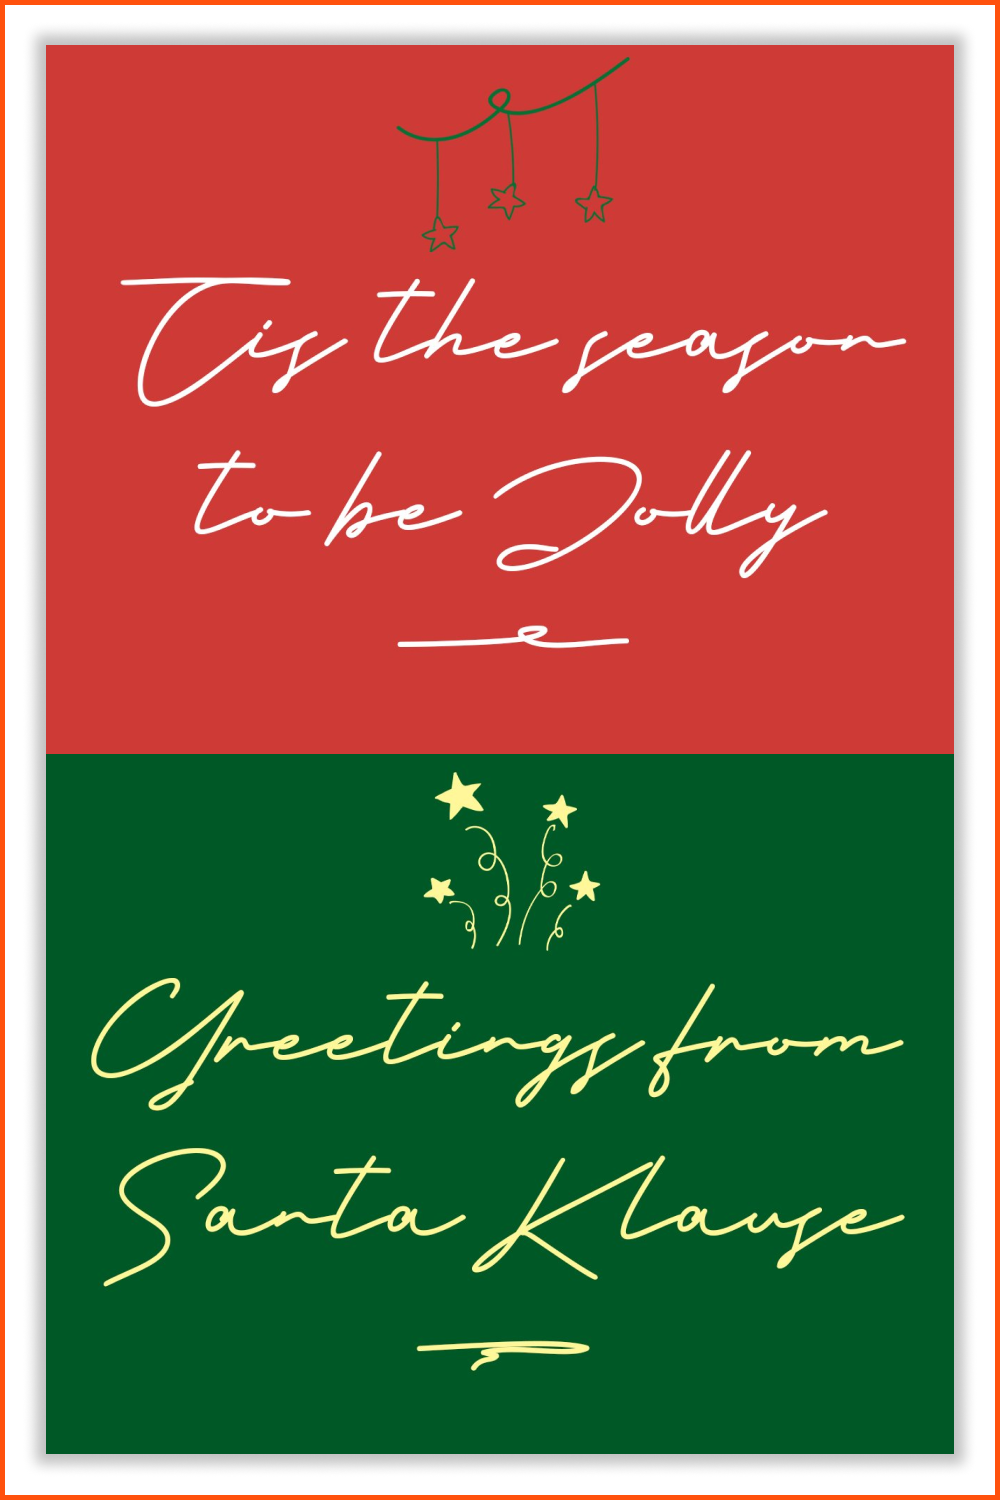 Calligraphic text on red and green backgrounds.